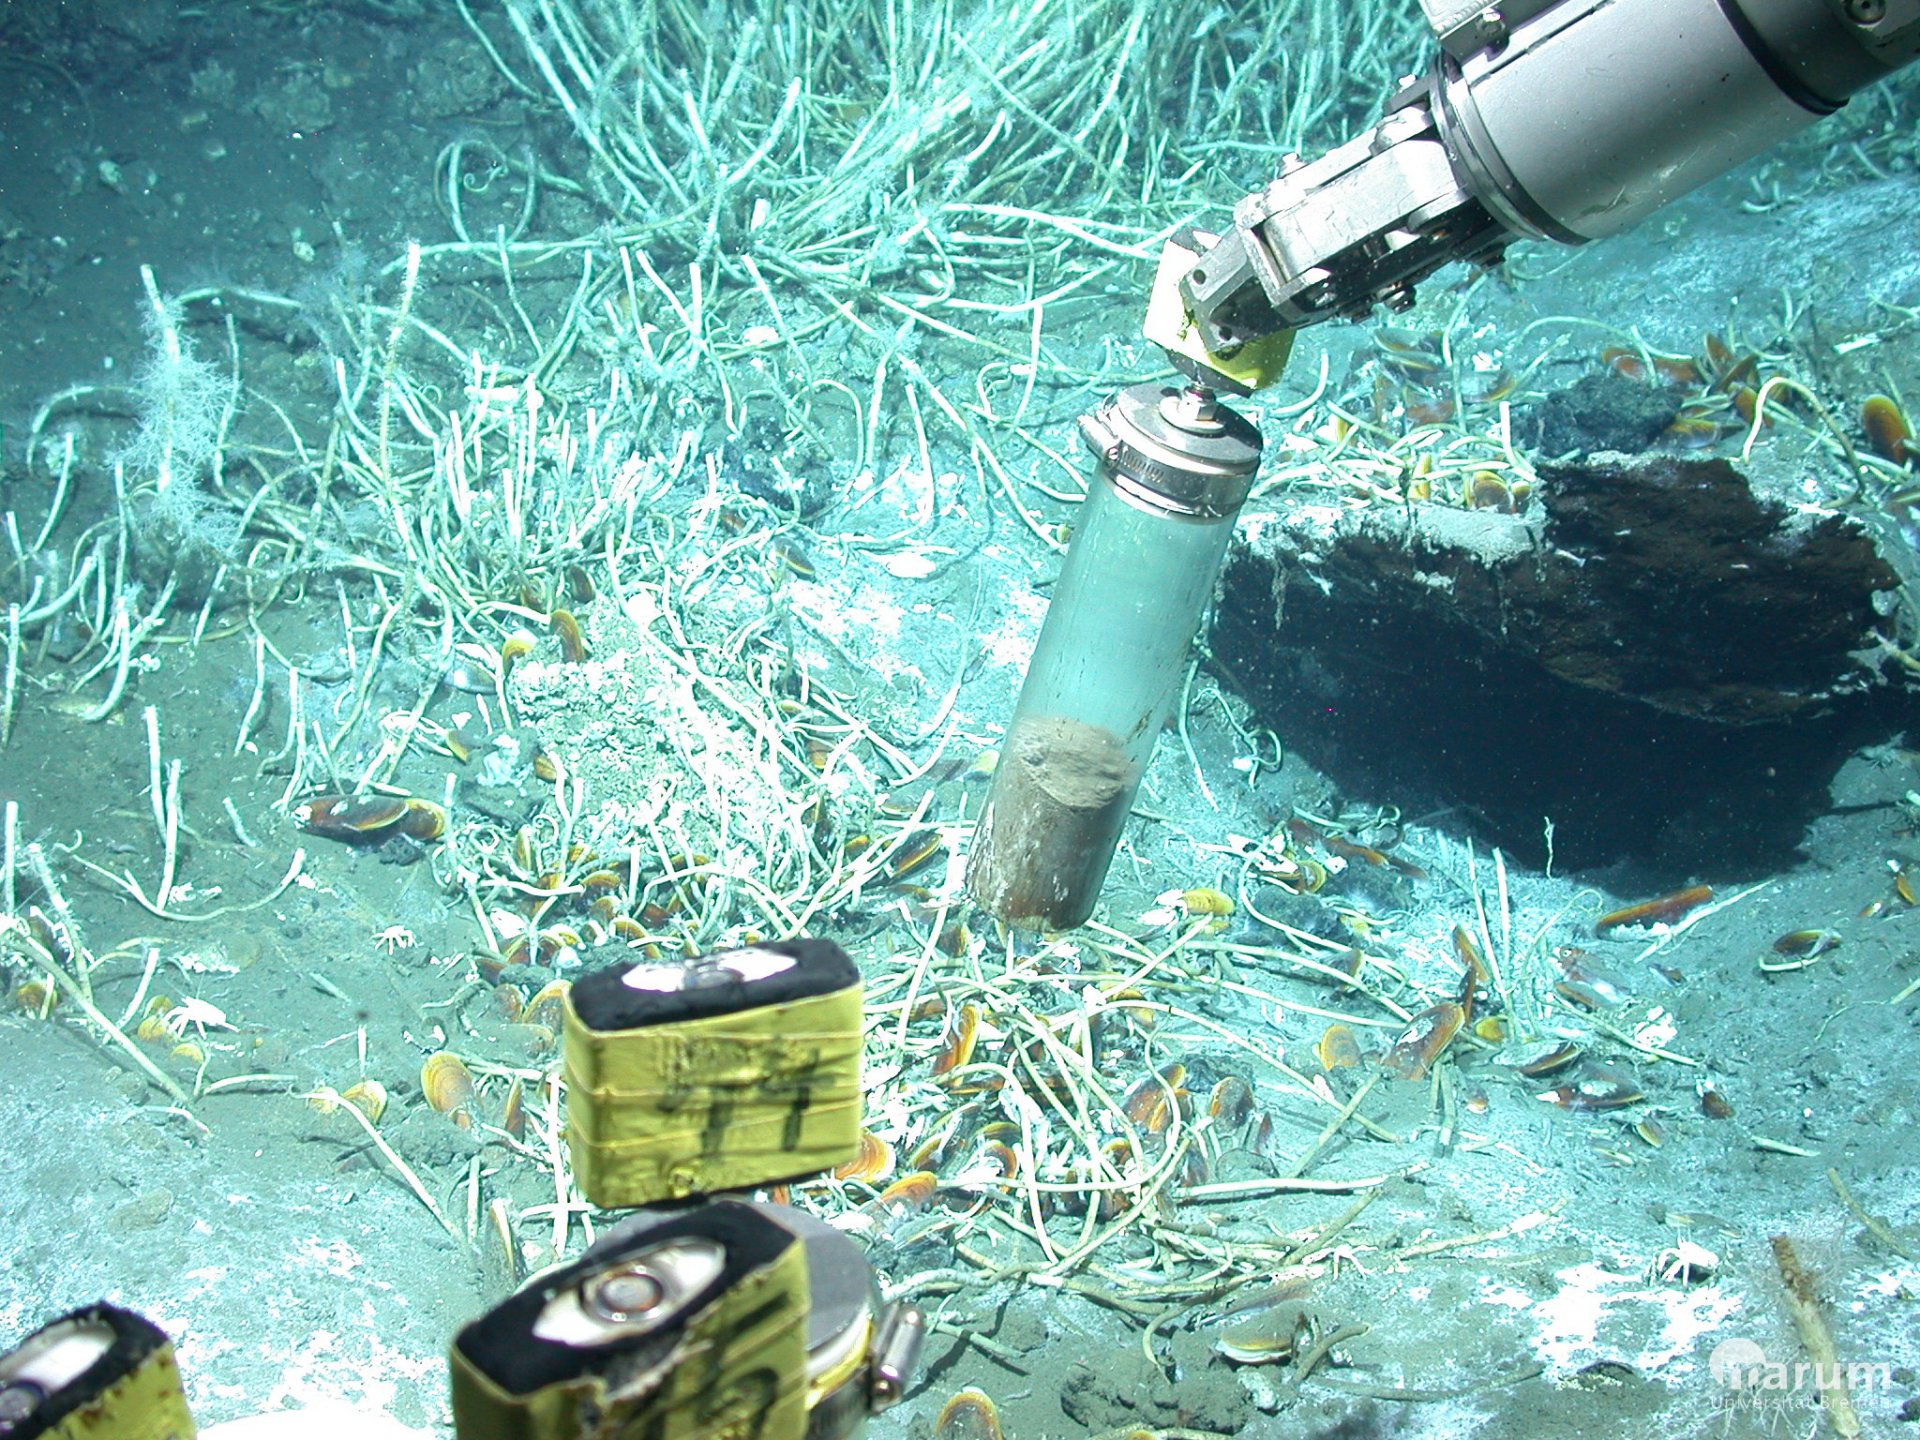 The submersible vehicle MARUM-QUEST samples for sediment at oil seeps in the Gulf of Mexico. (© MARUM – Centre for Marine Environmental Sciences)